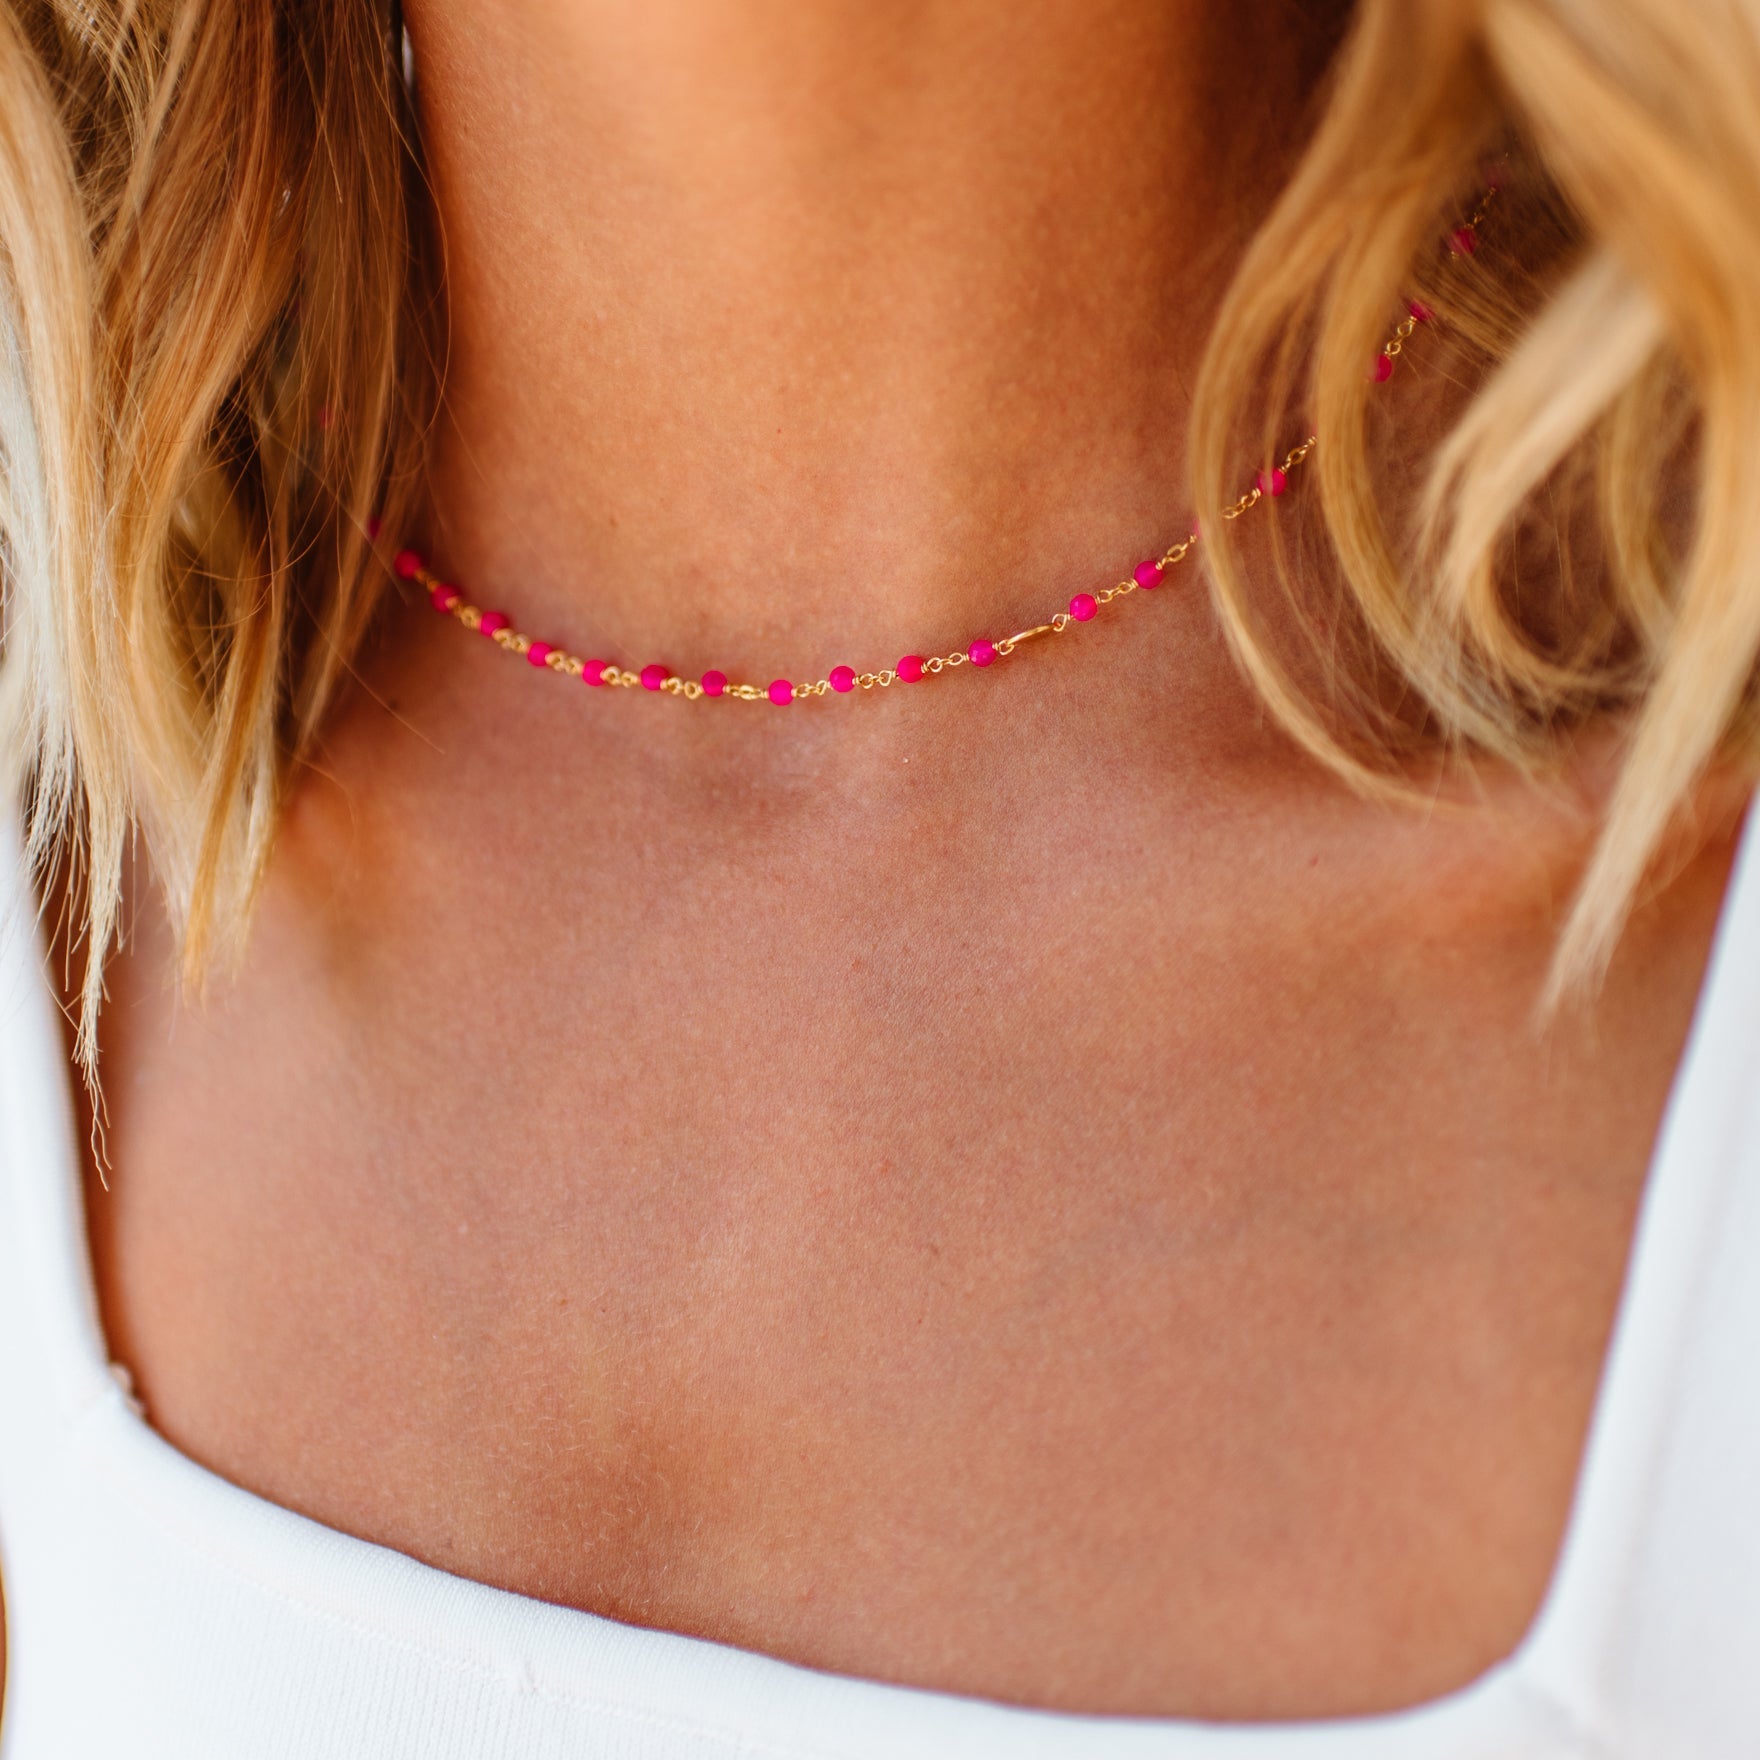 ICONIC SHORT BEADED NECKLACE - HOT PINK CHALCEDONY & GOLD 16-20" - SO PRETTY CARA COTTER